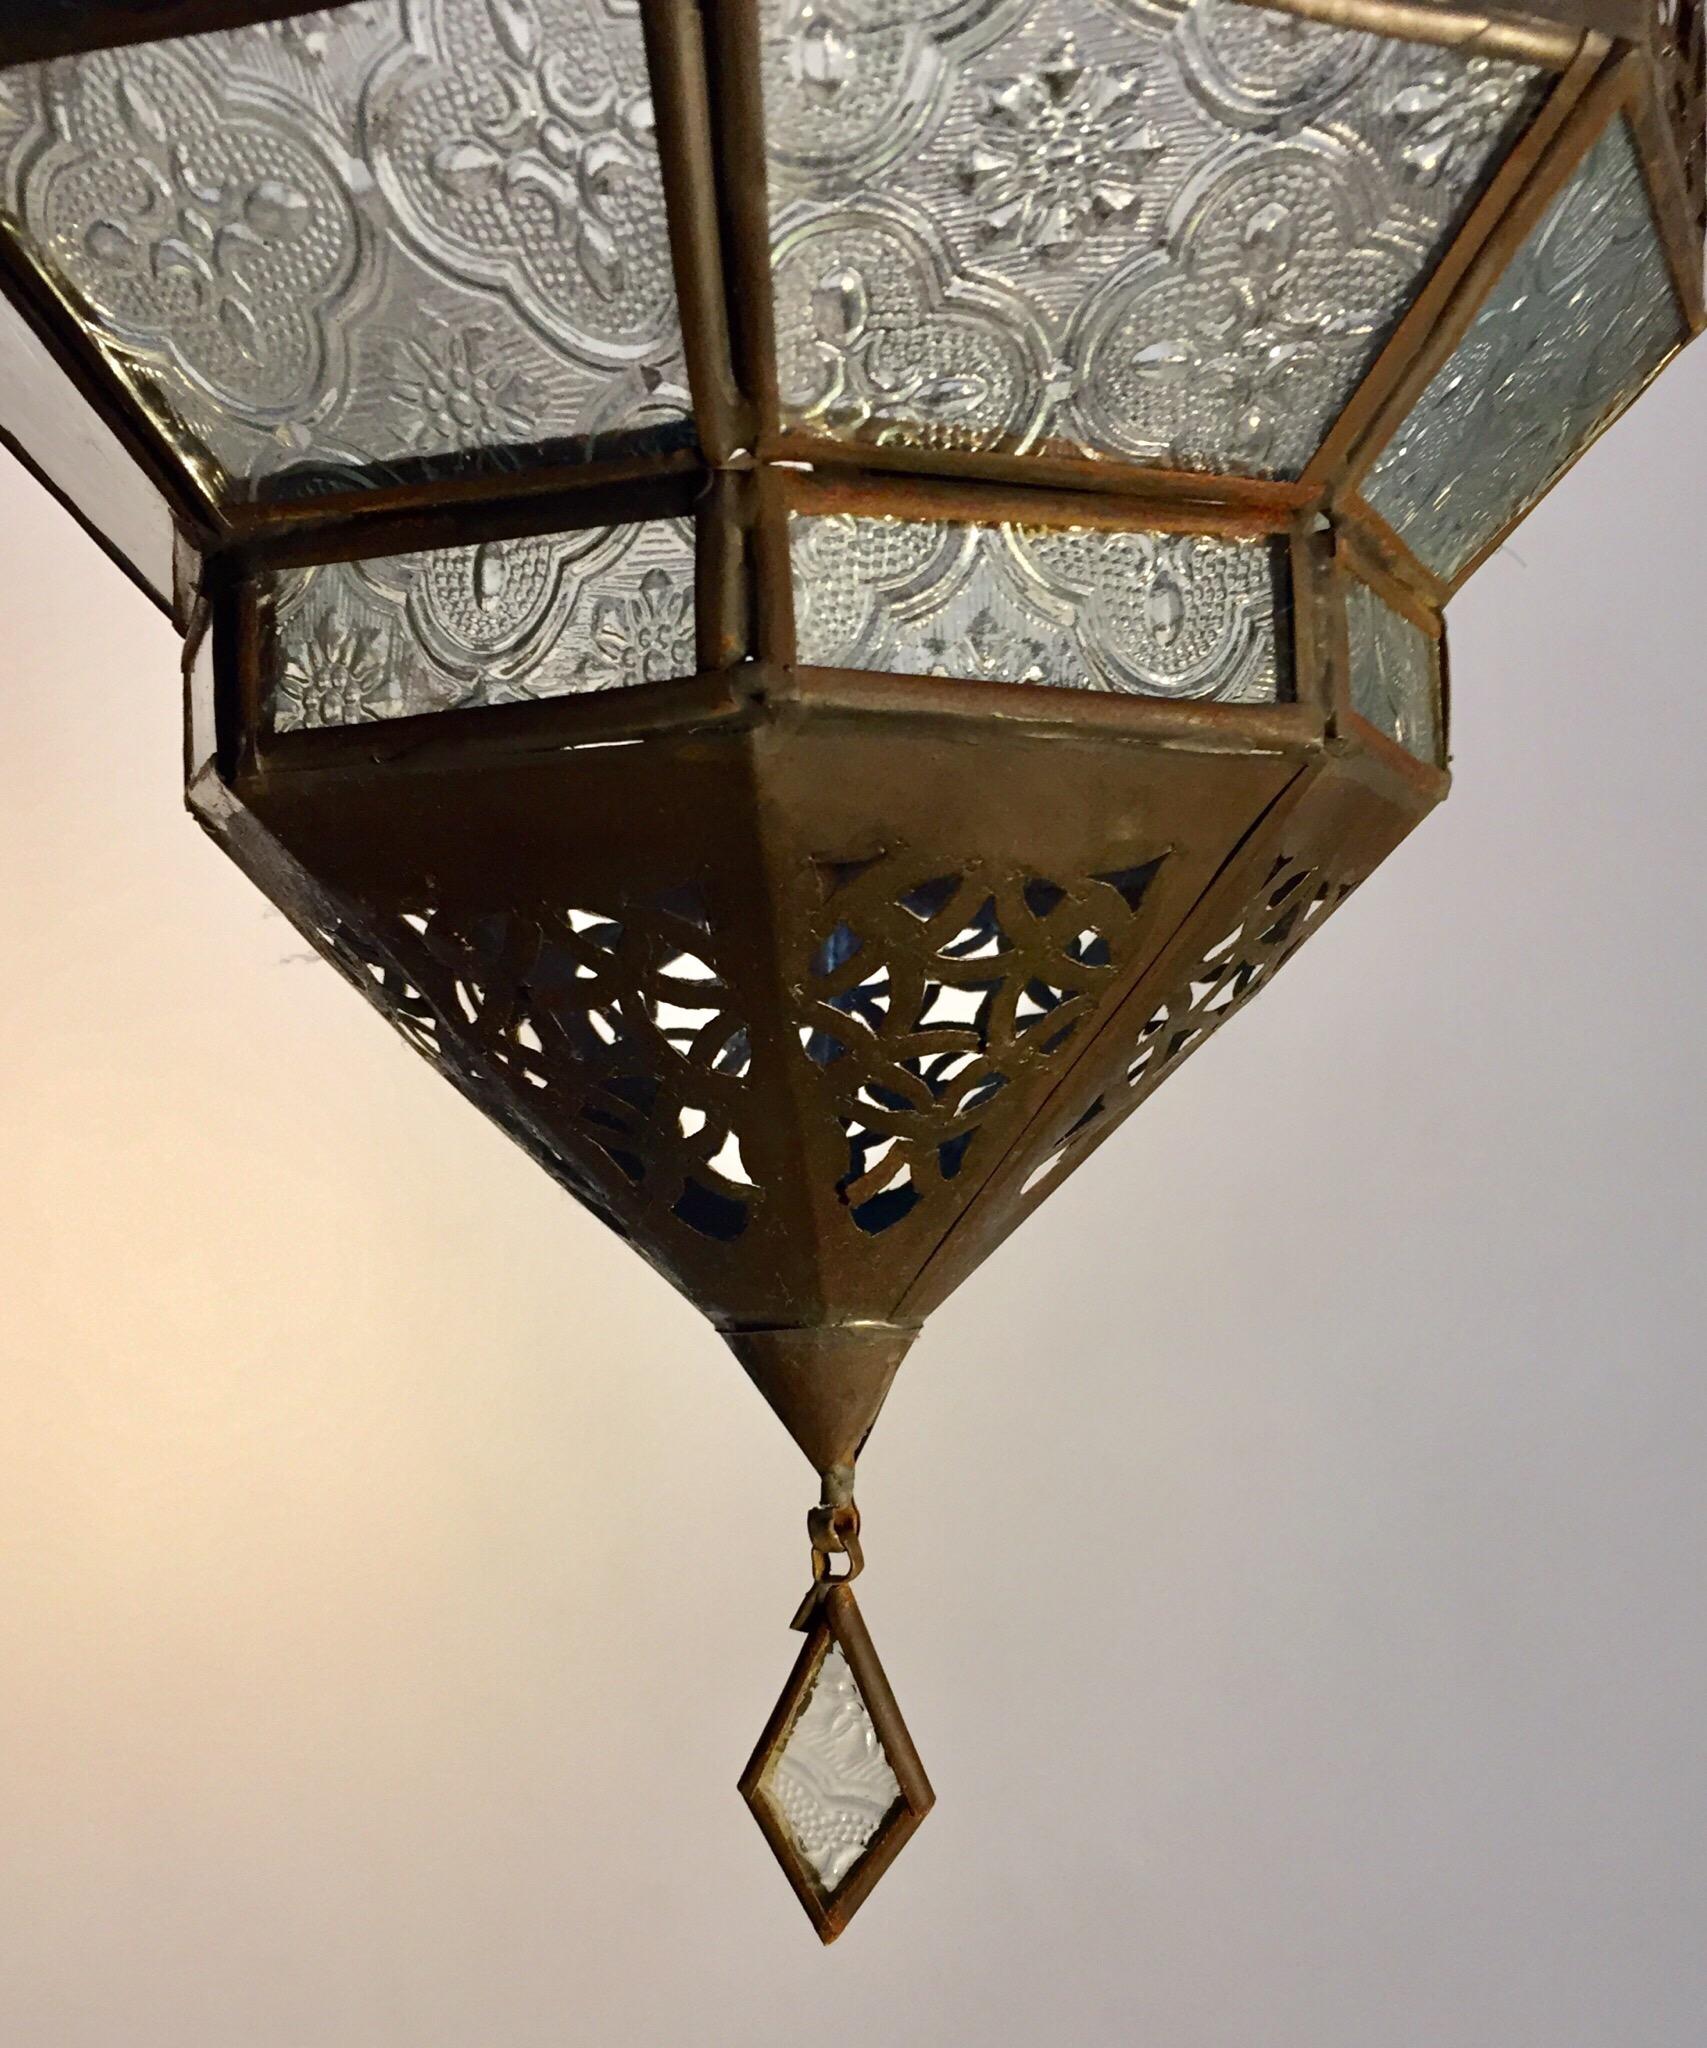 20th Century Handcrafted Moroccan Metal Lantern, Octagonal Shape with Clear Glass